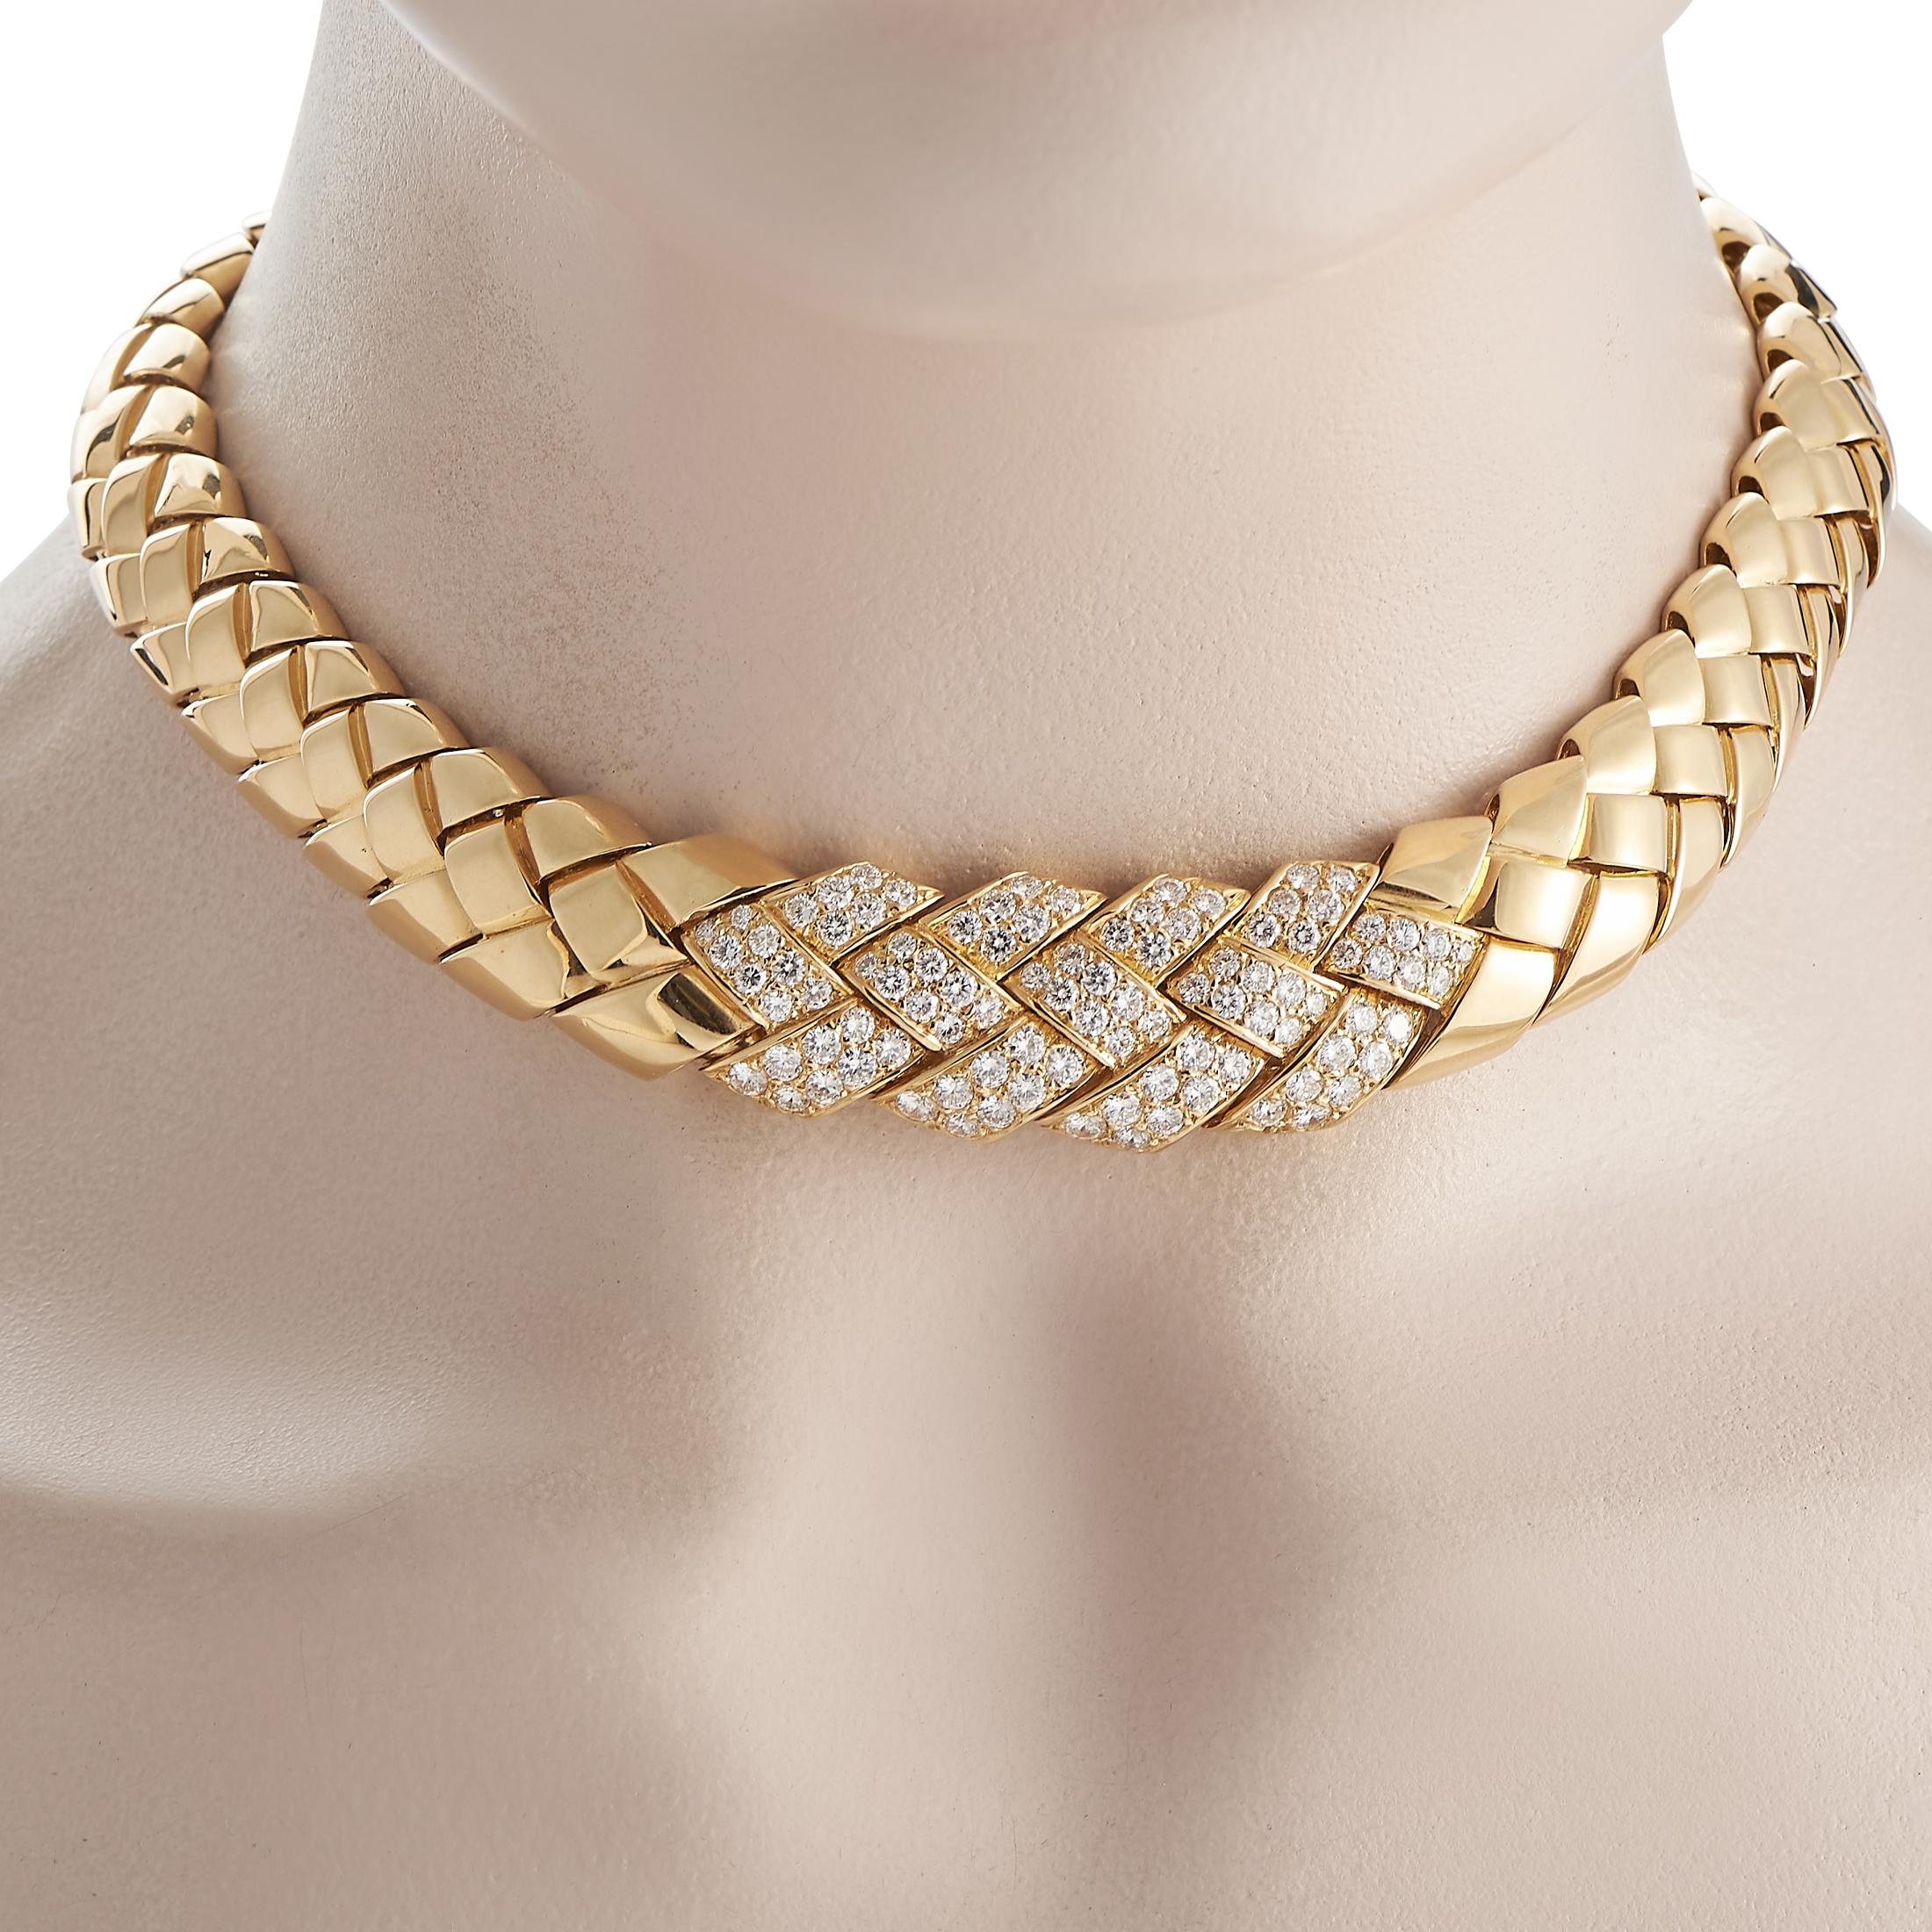 You'll be completely smitten by the dramatic beauty of this collar necklace by Van Cleef & Arpels. It offers a bold look with its yellow gold ribbons woven to form a chunky neckpiece. The diamond-encrusted center ribbons bring a beautiful sparkle to